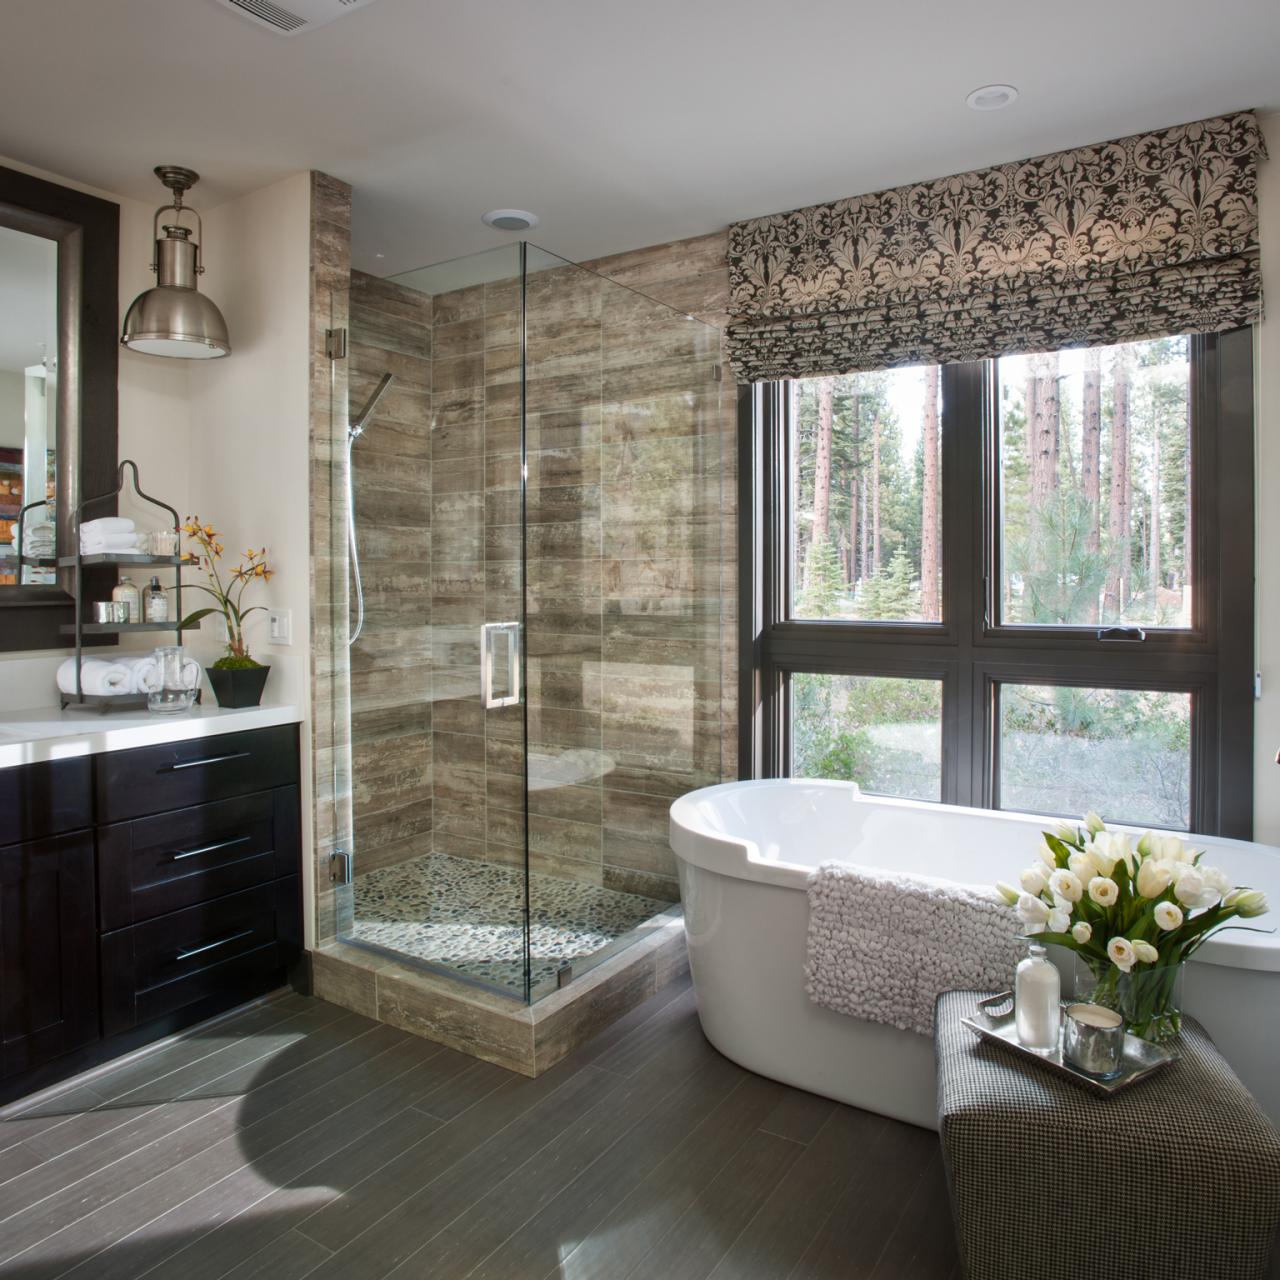 Trend Alert? 8 Narrow Bathrooms That Rock Tubs in the Shower